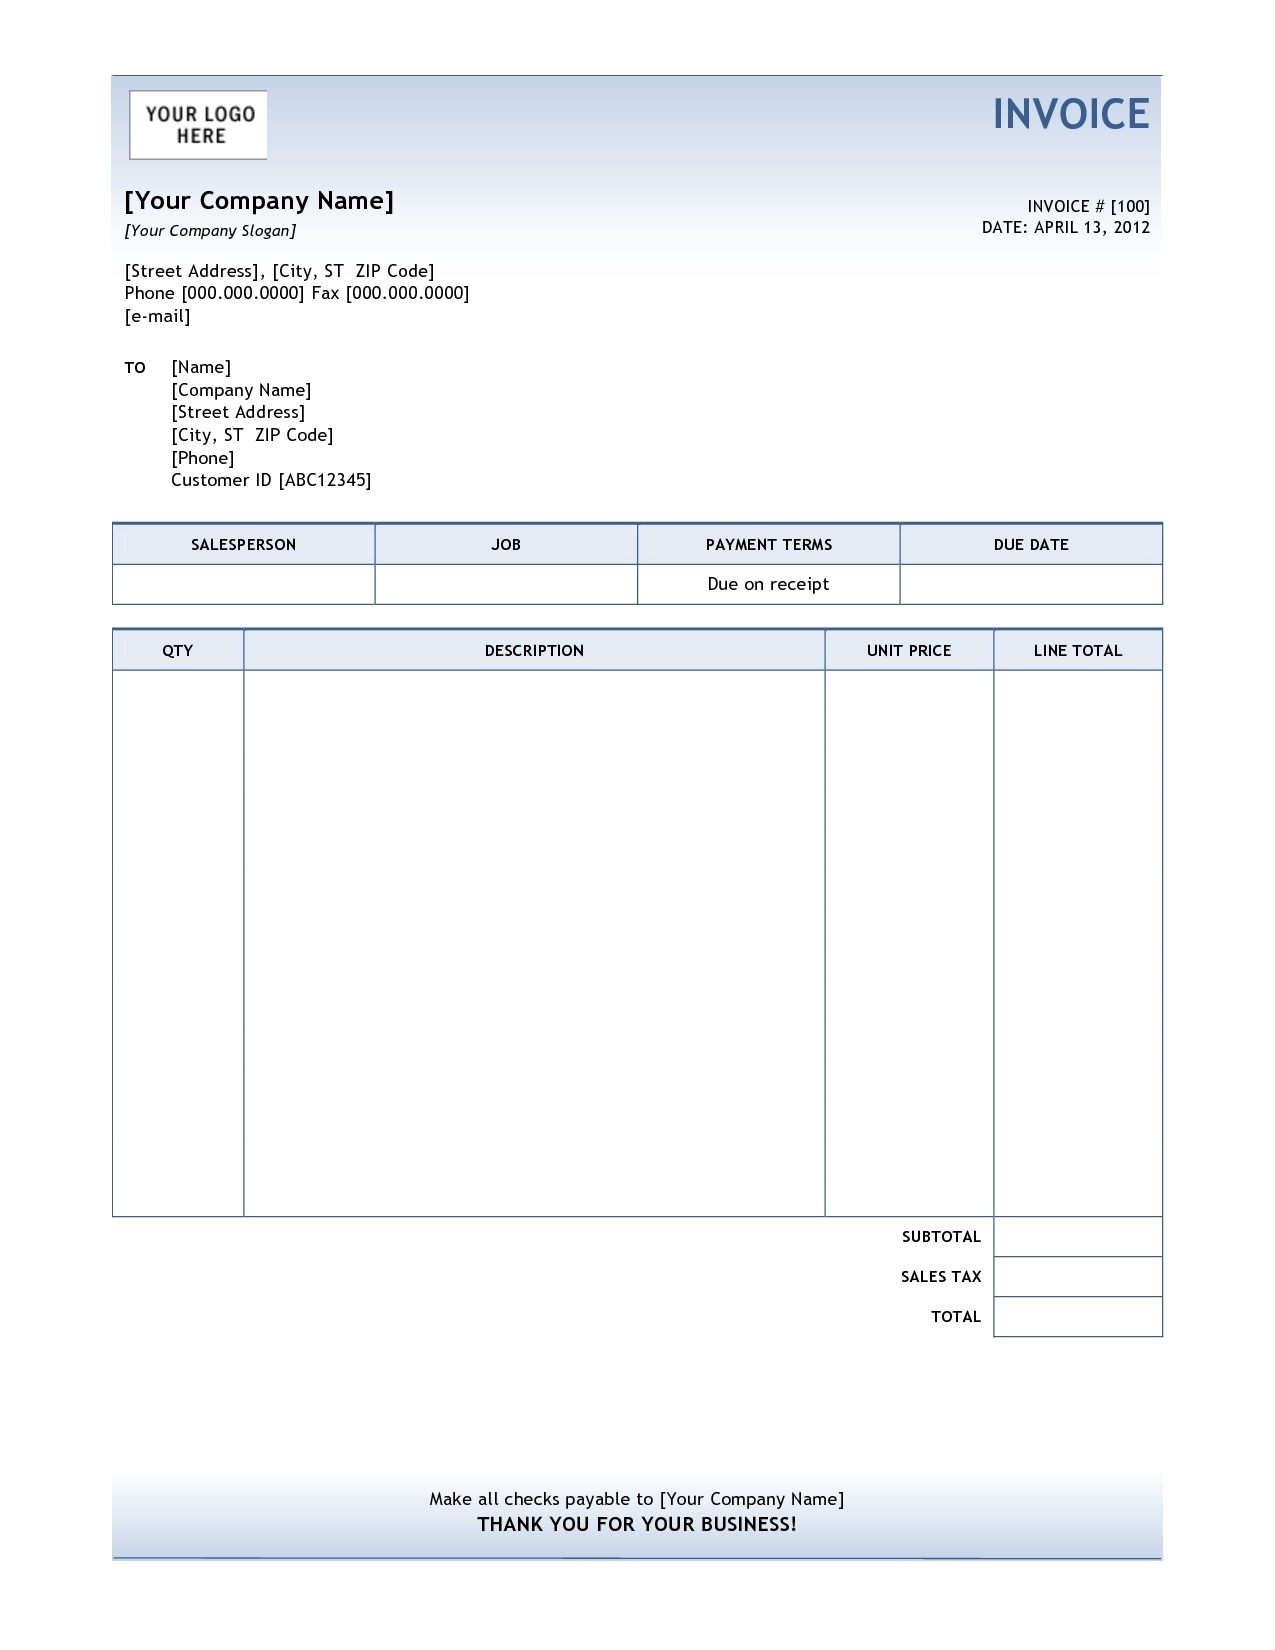 invoice template word 2007 free download printable invoice template format of invoice in word